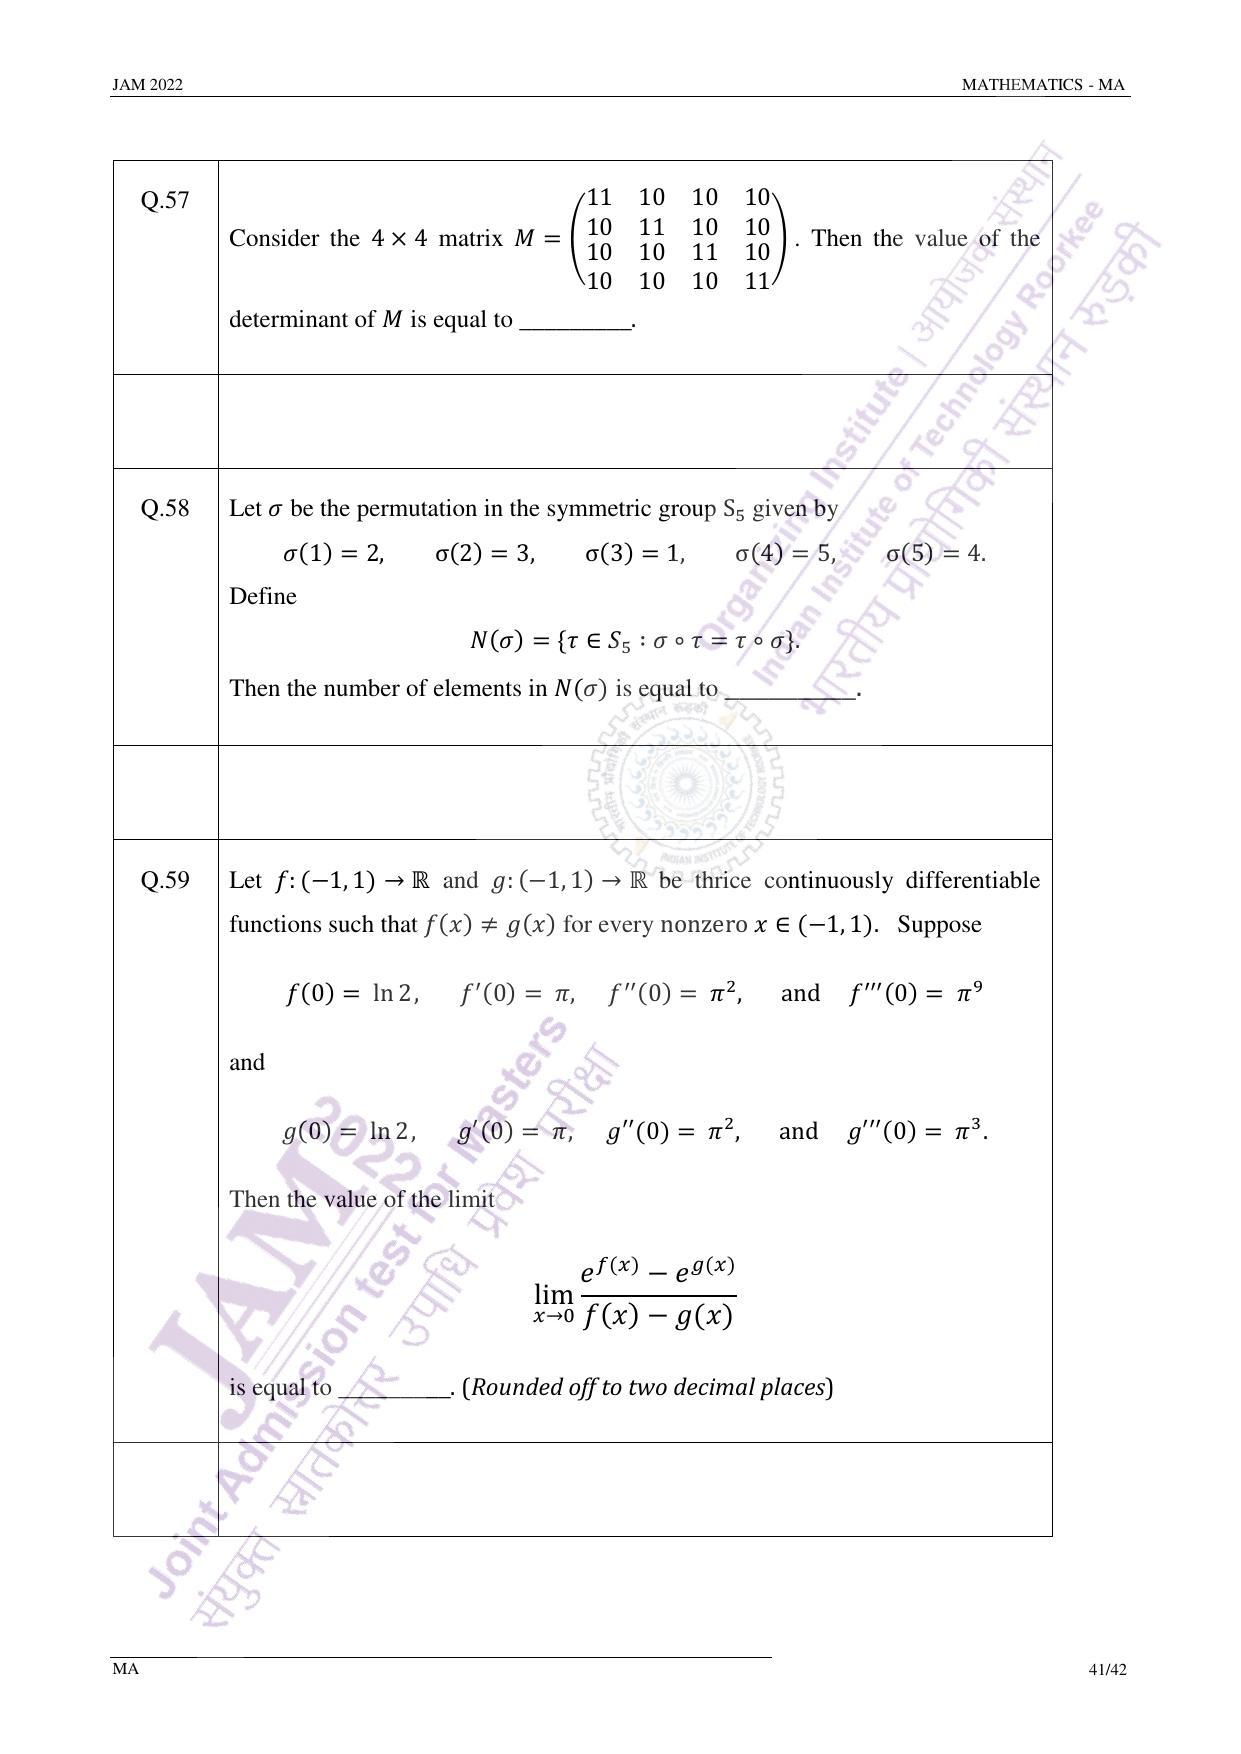 JAM 2022: MA Question Paper - Page 41